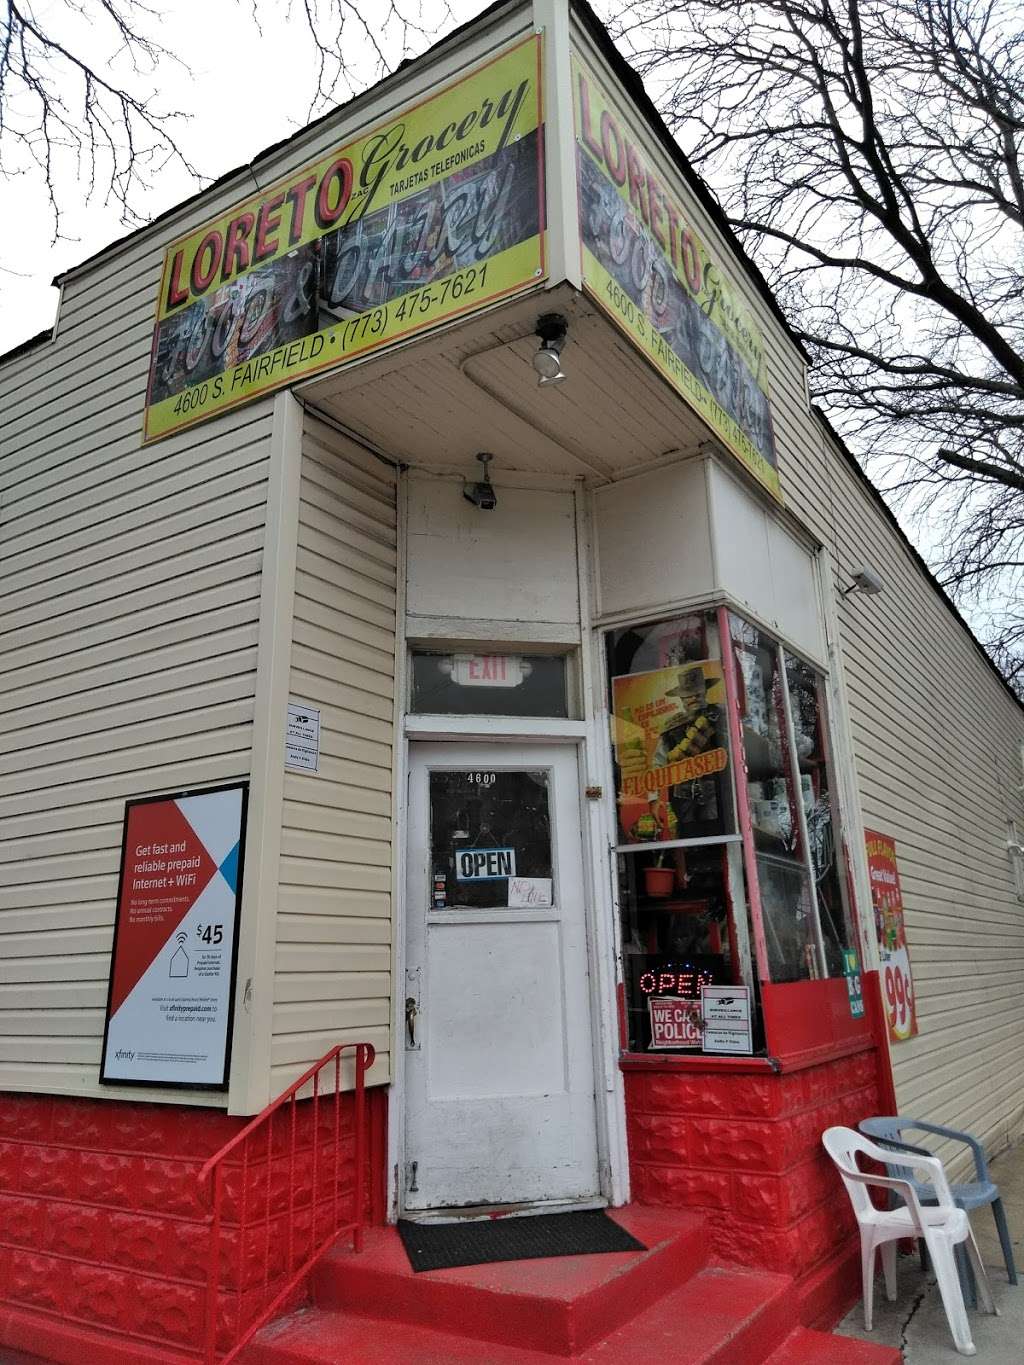 Loreto Grocery | 4600 S Fairfield Ave, Chicago, IL 60632 | Phone: (773) 475-7621